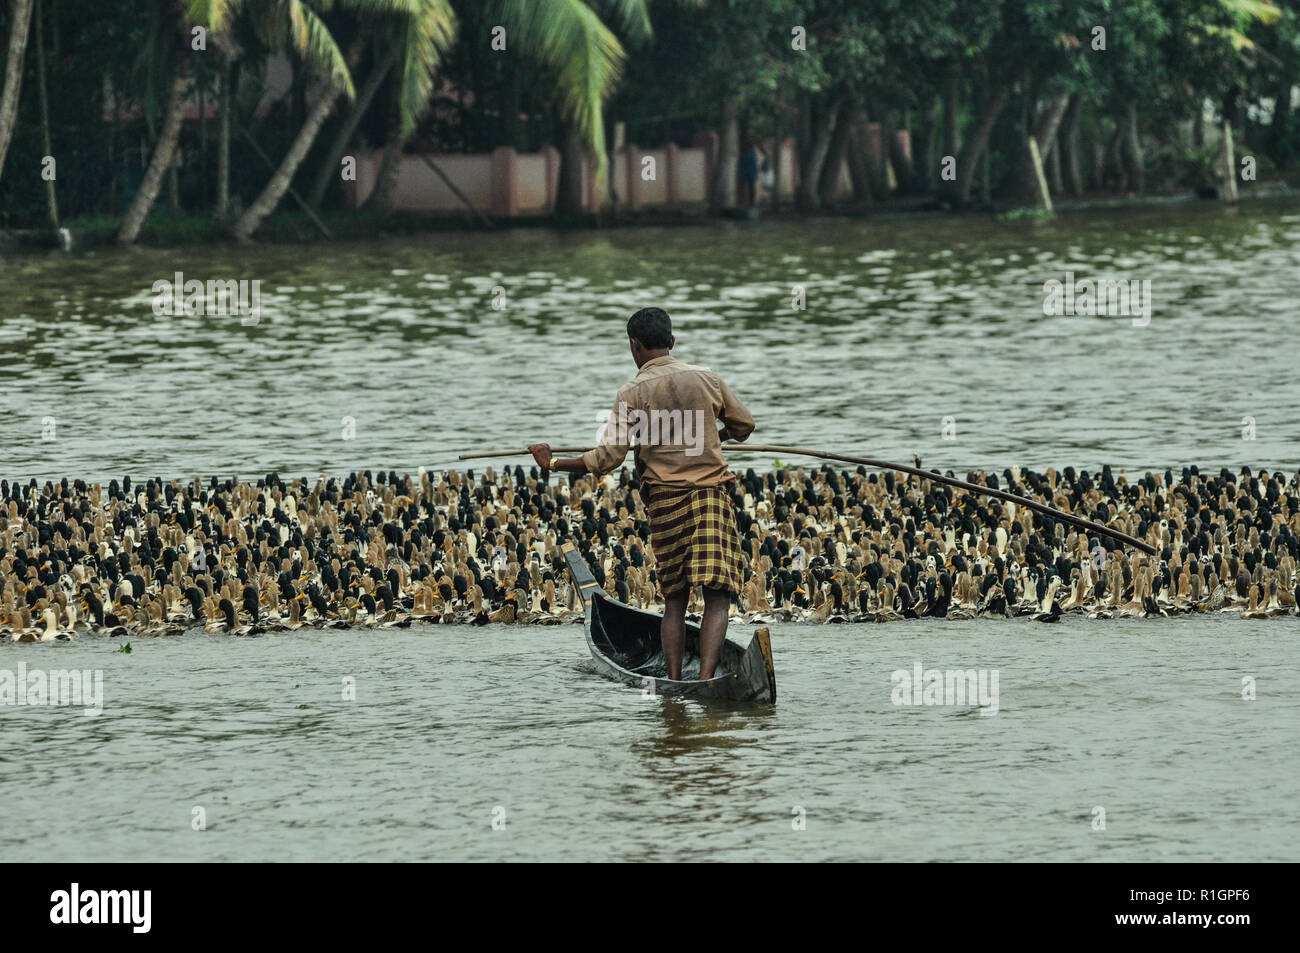 Big group of ducks are spurred across the water by a shepherd standing in a boat in the picturesque backwaters, Kerala, South India. Stock Photo